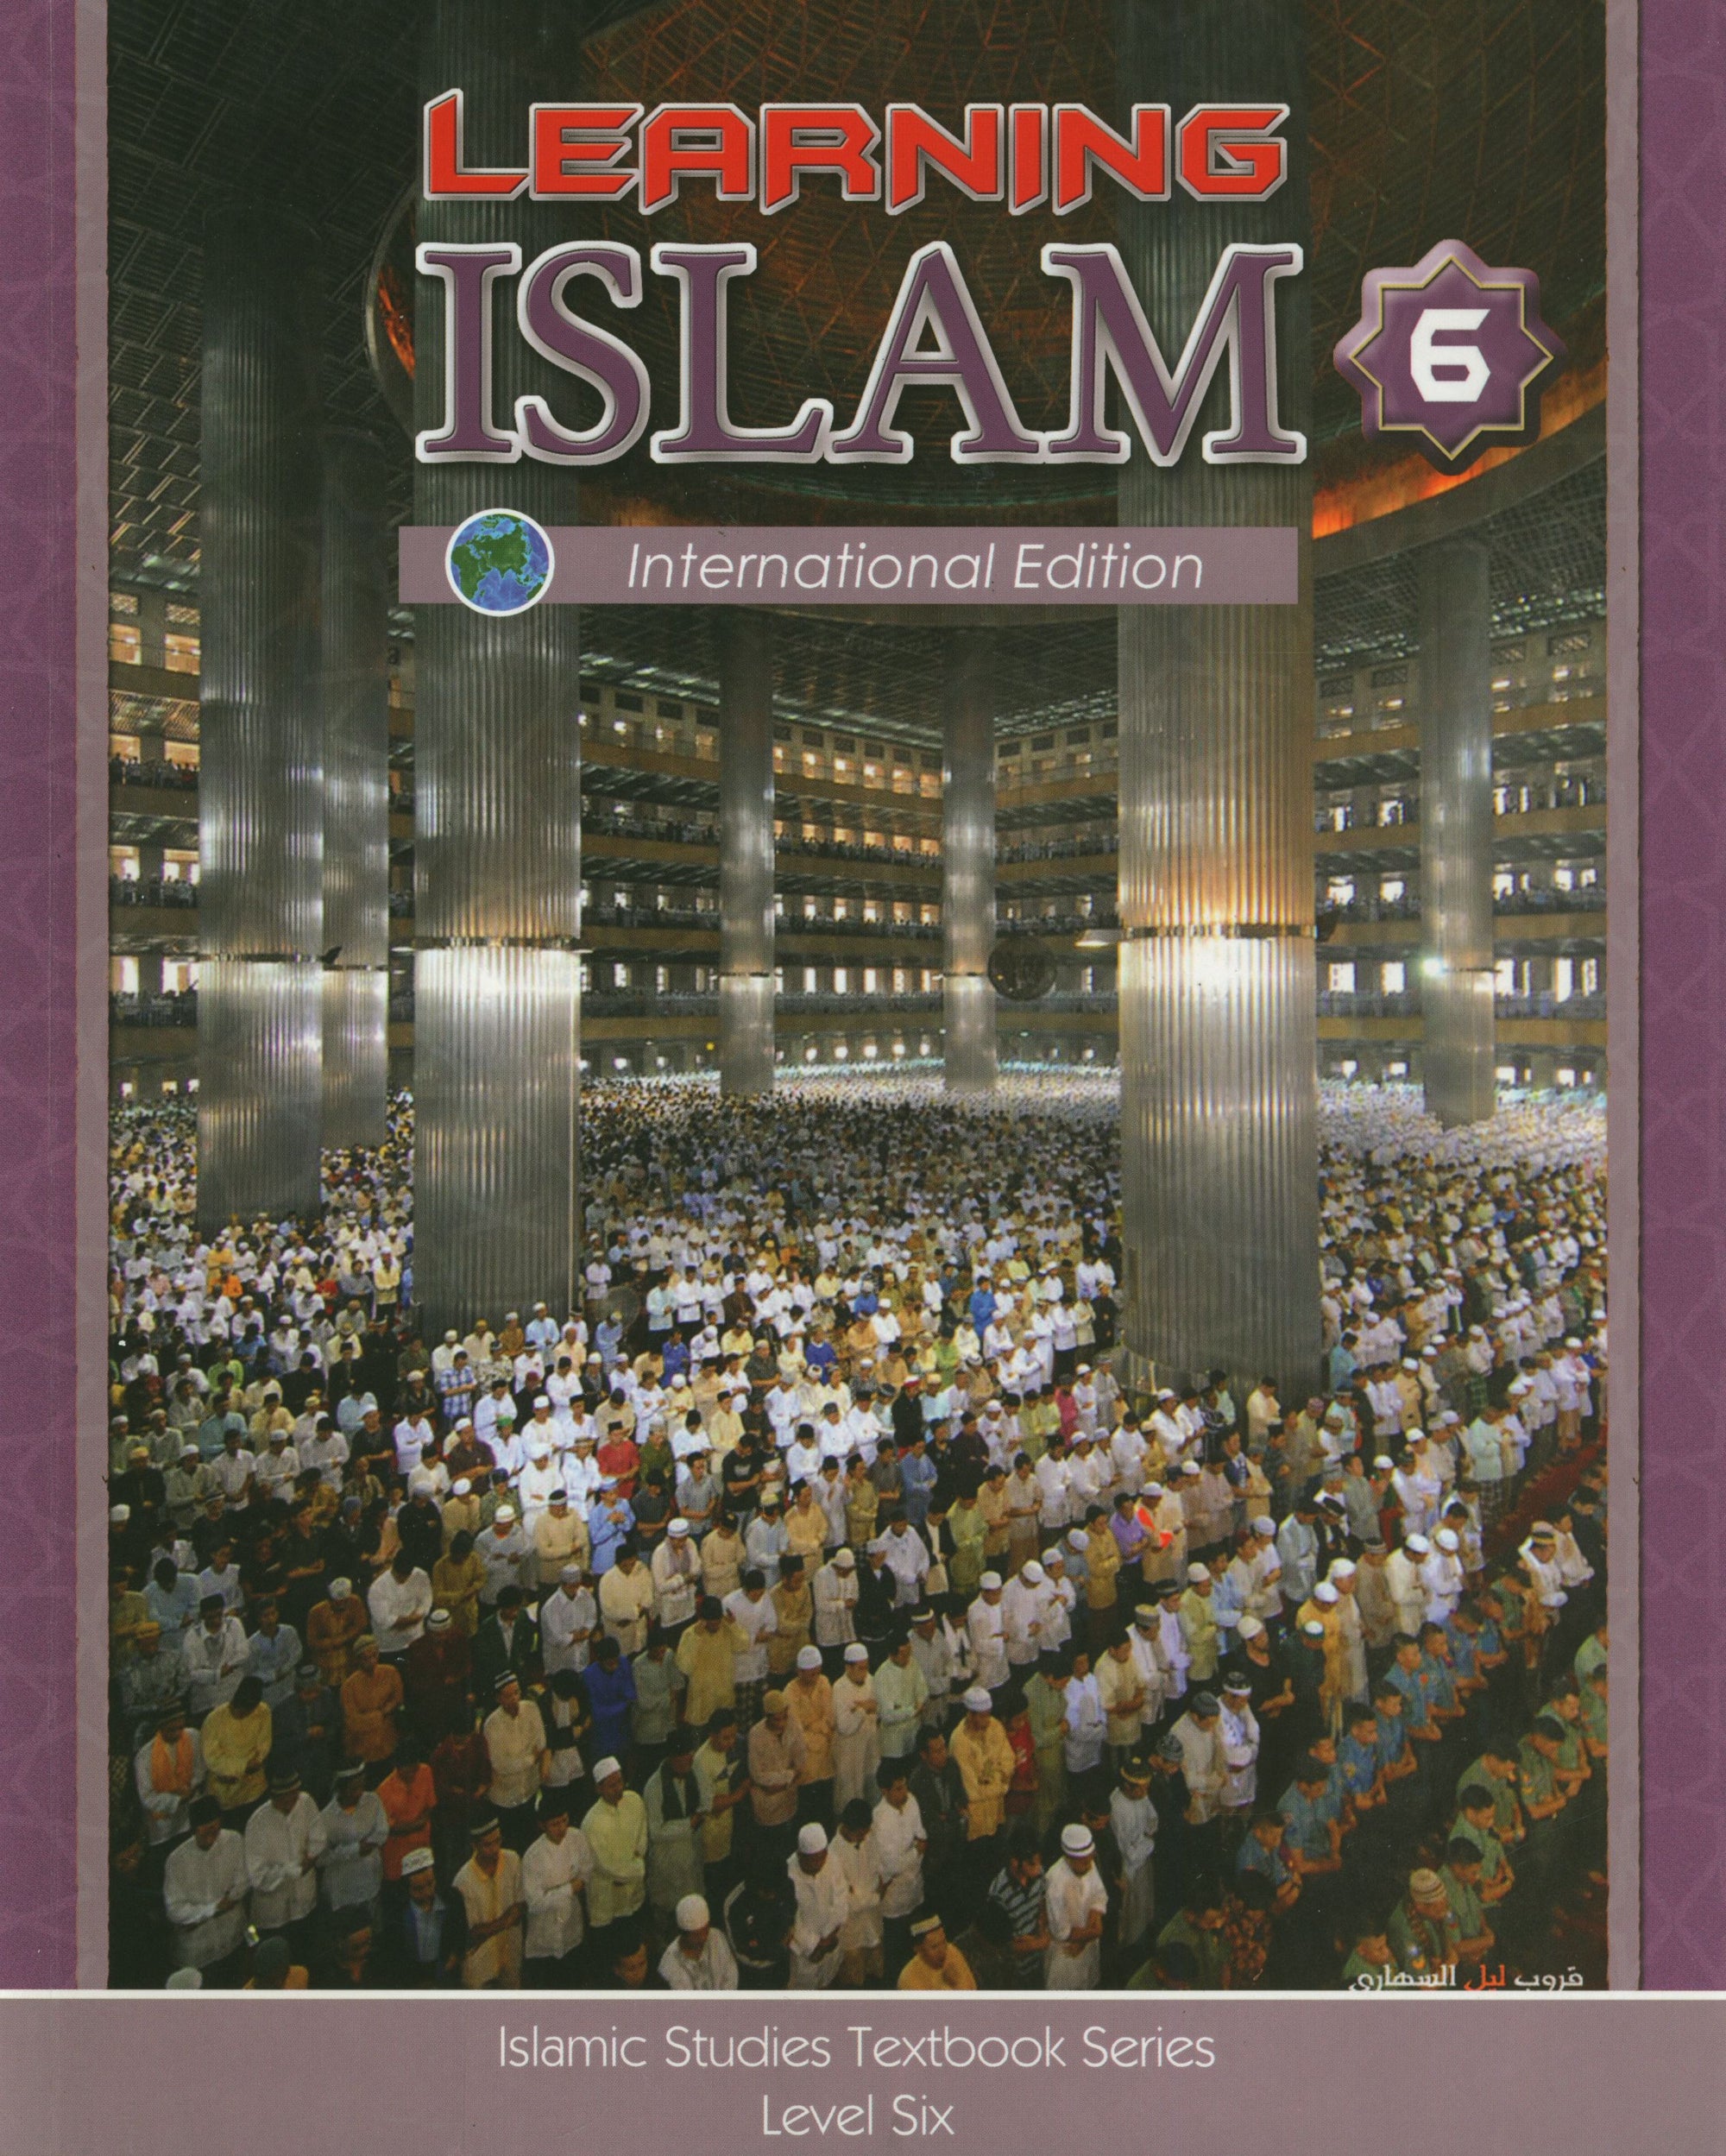 Learning Islam Weekend Edition Textbook Level 6 (11th Grade 